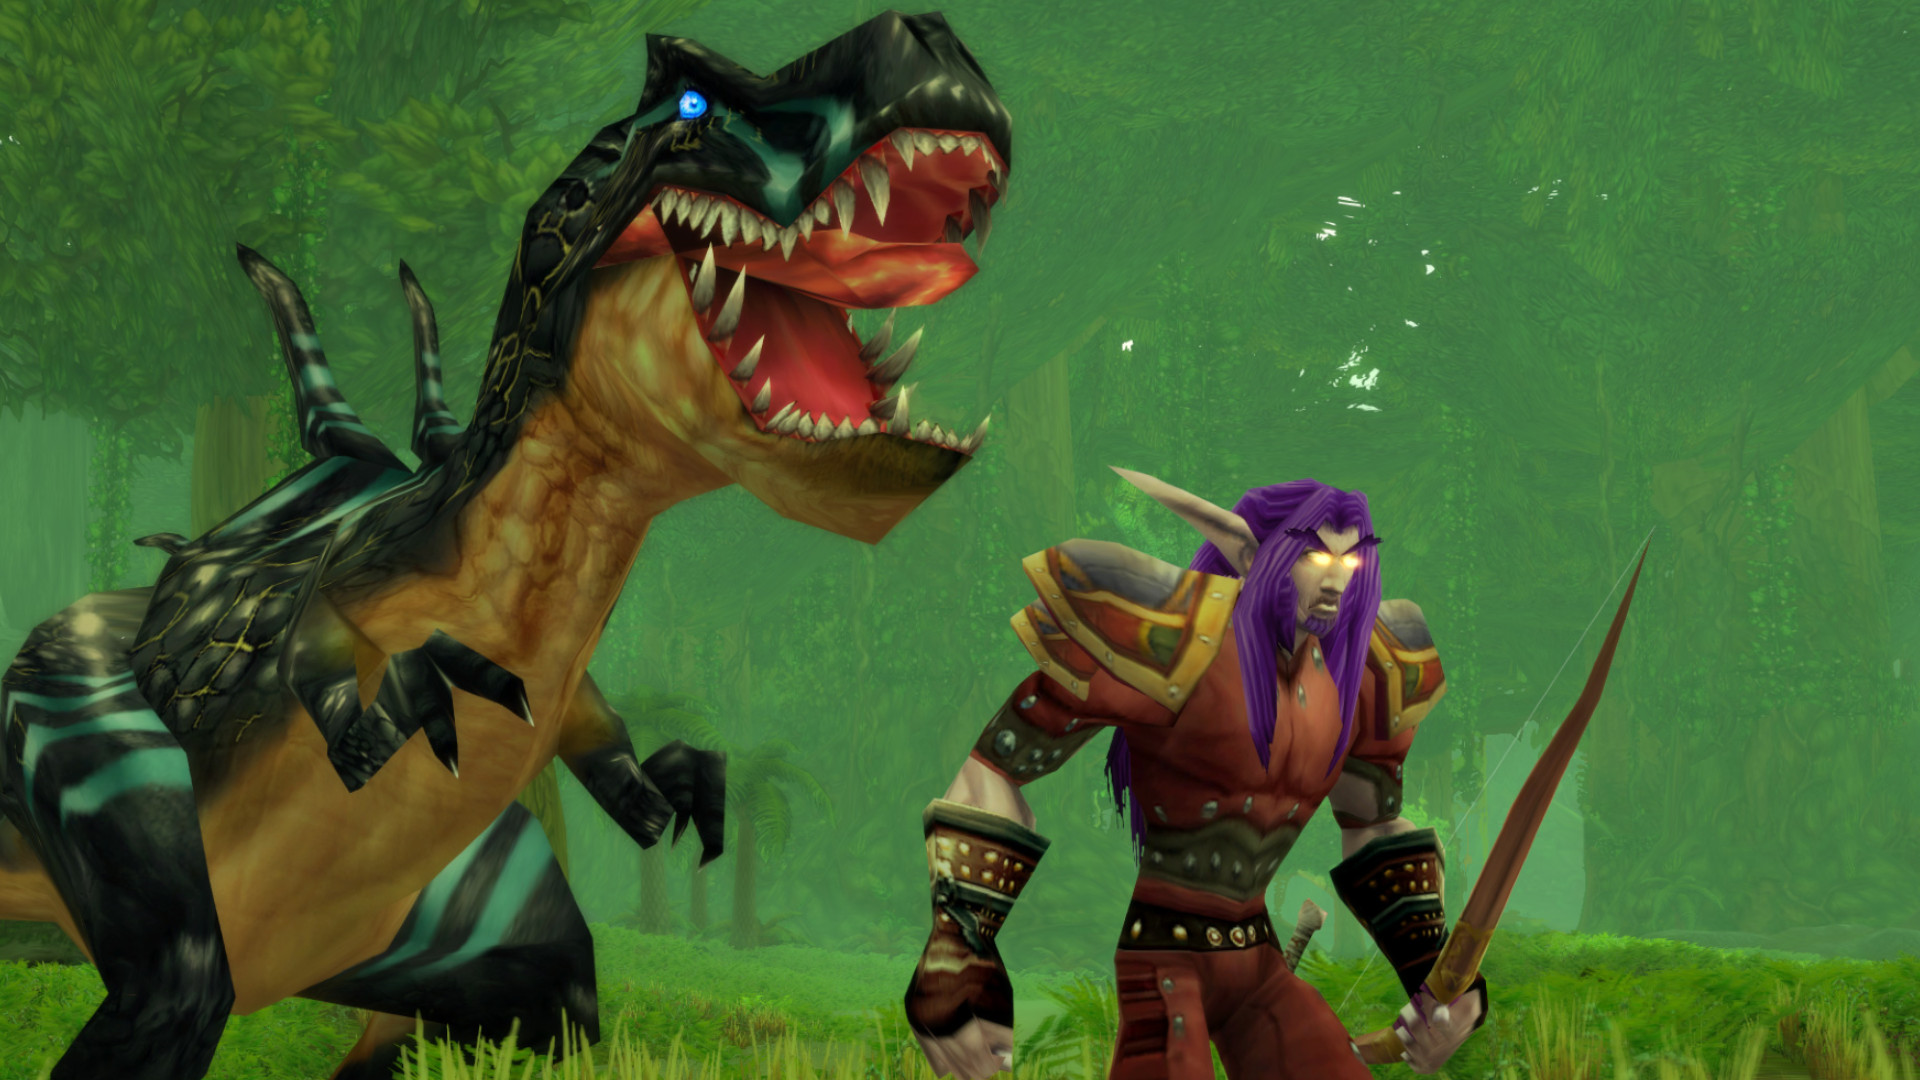 Blizzard Warns WoW Players: Stop Jumping or Face Consequences - Find Out Why! 9